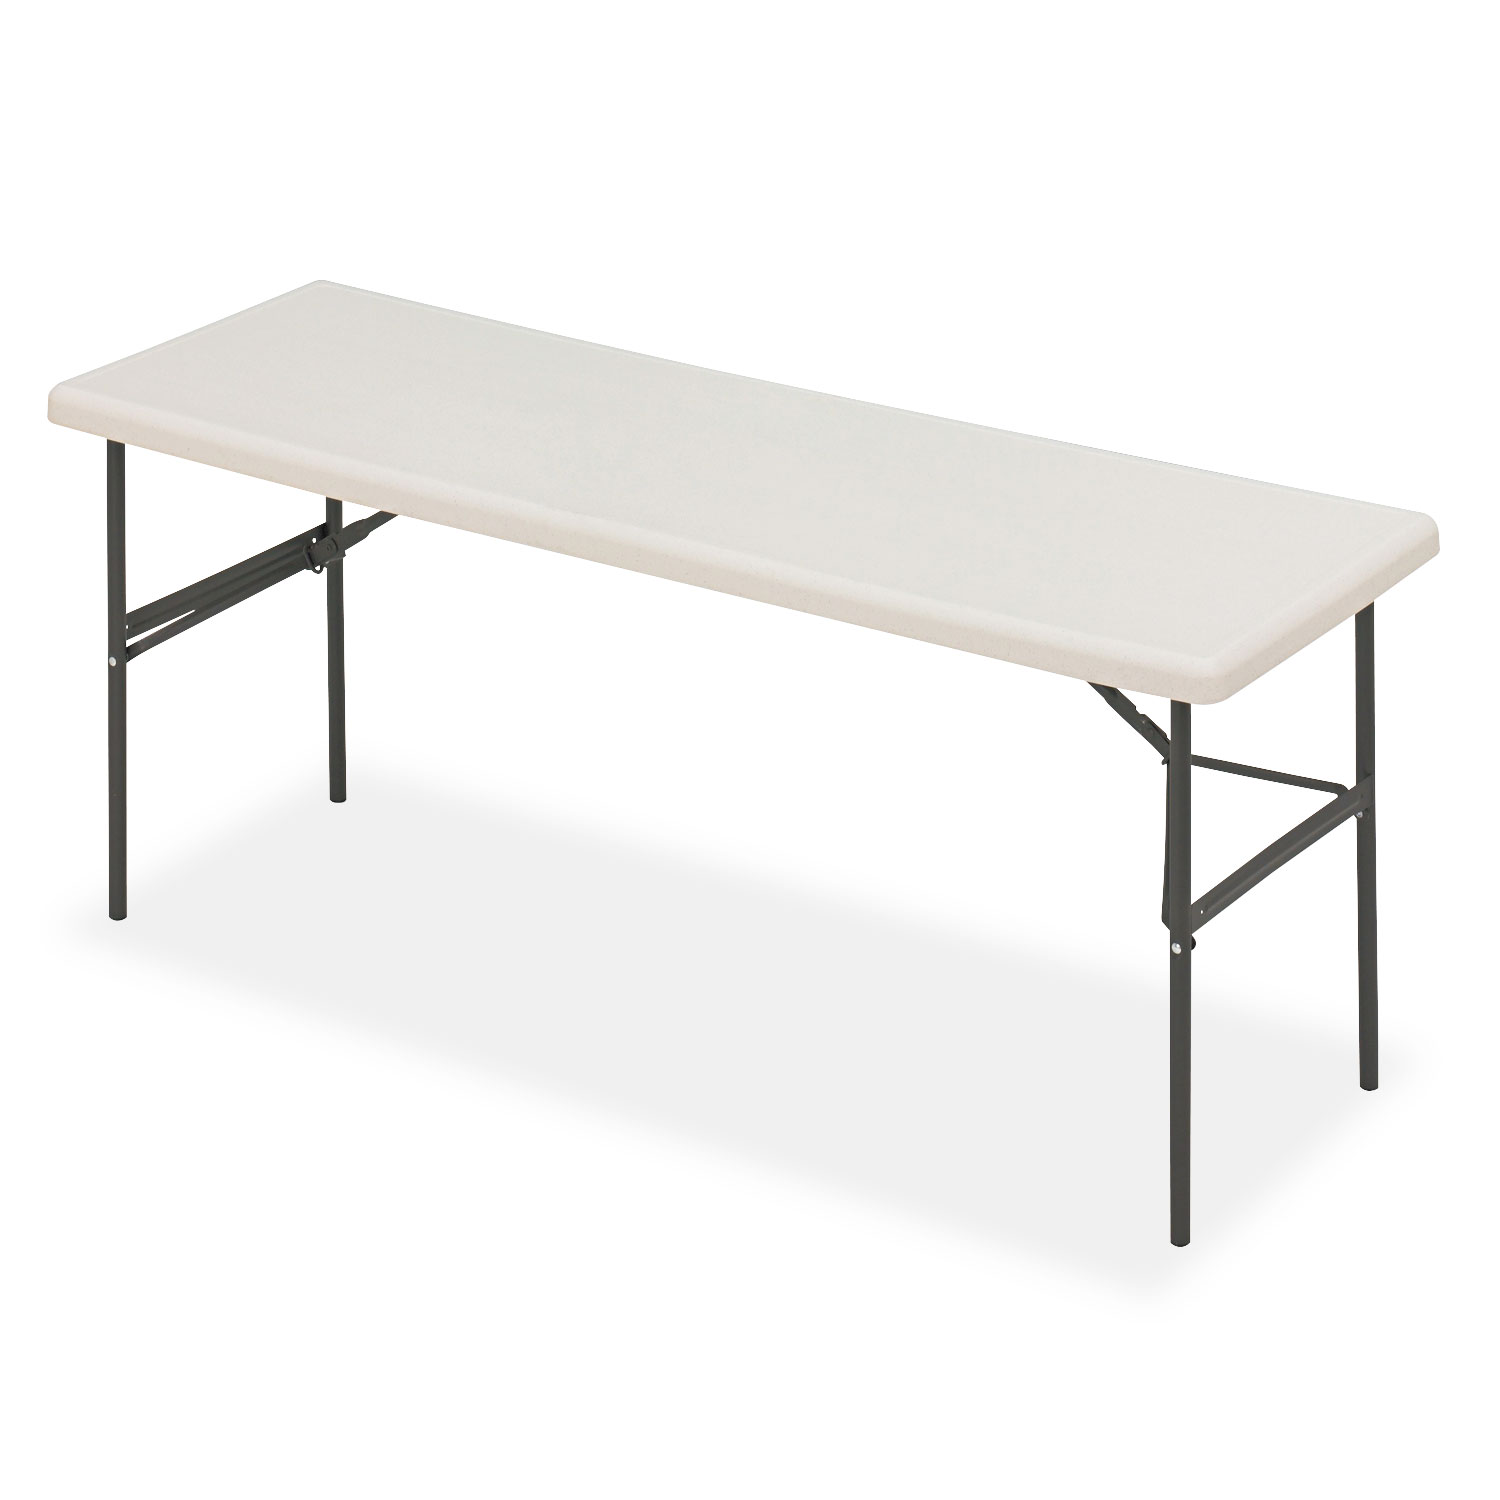 IndestrucTables Too 1200 Series Resin Folding Table, 72w x 24d x 29h, Platinum